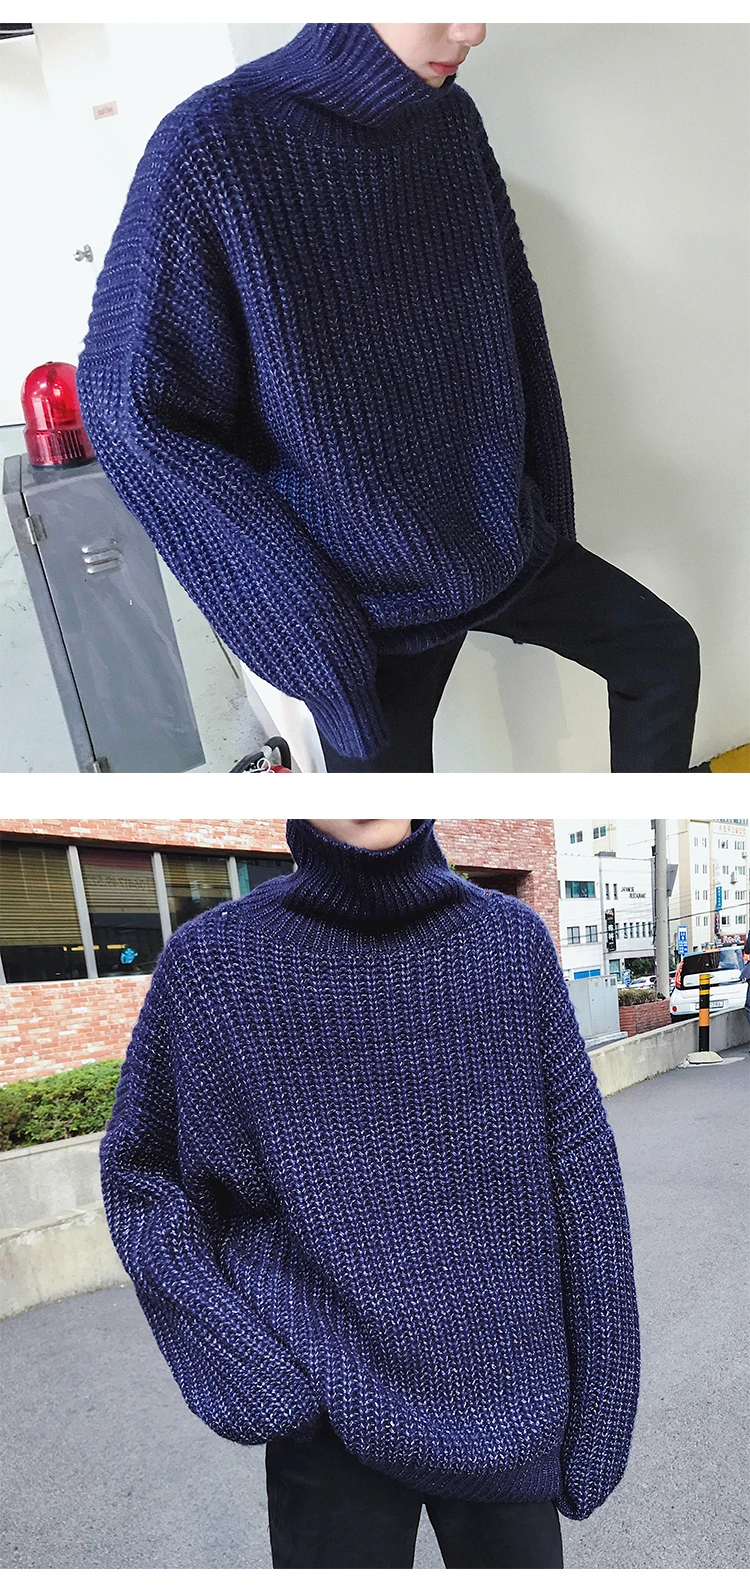 Winter New High Collar Sweater Men's Warm Fashion Solid Color Casual Knit Sweater Man Wild Loose Long Sleeve Pullover Men